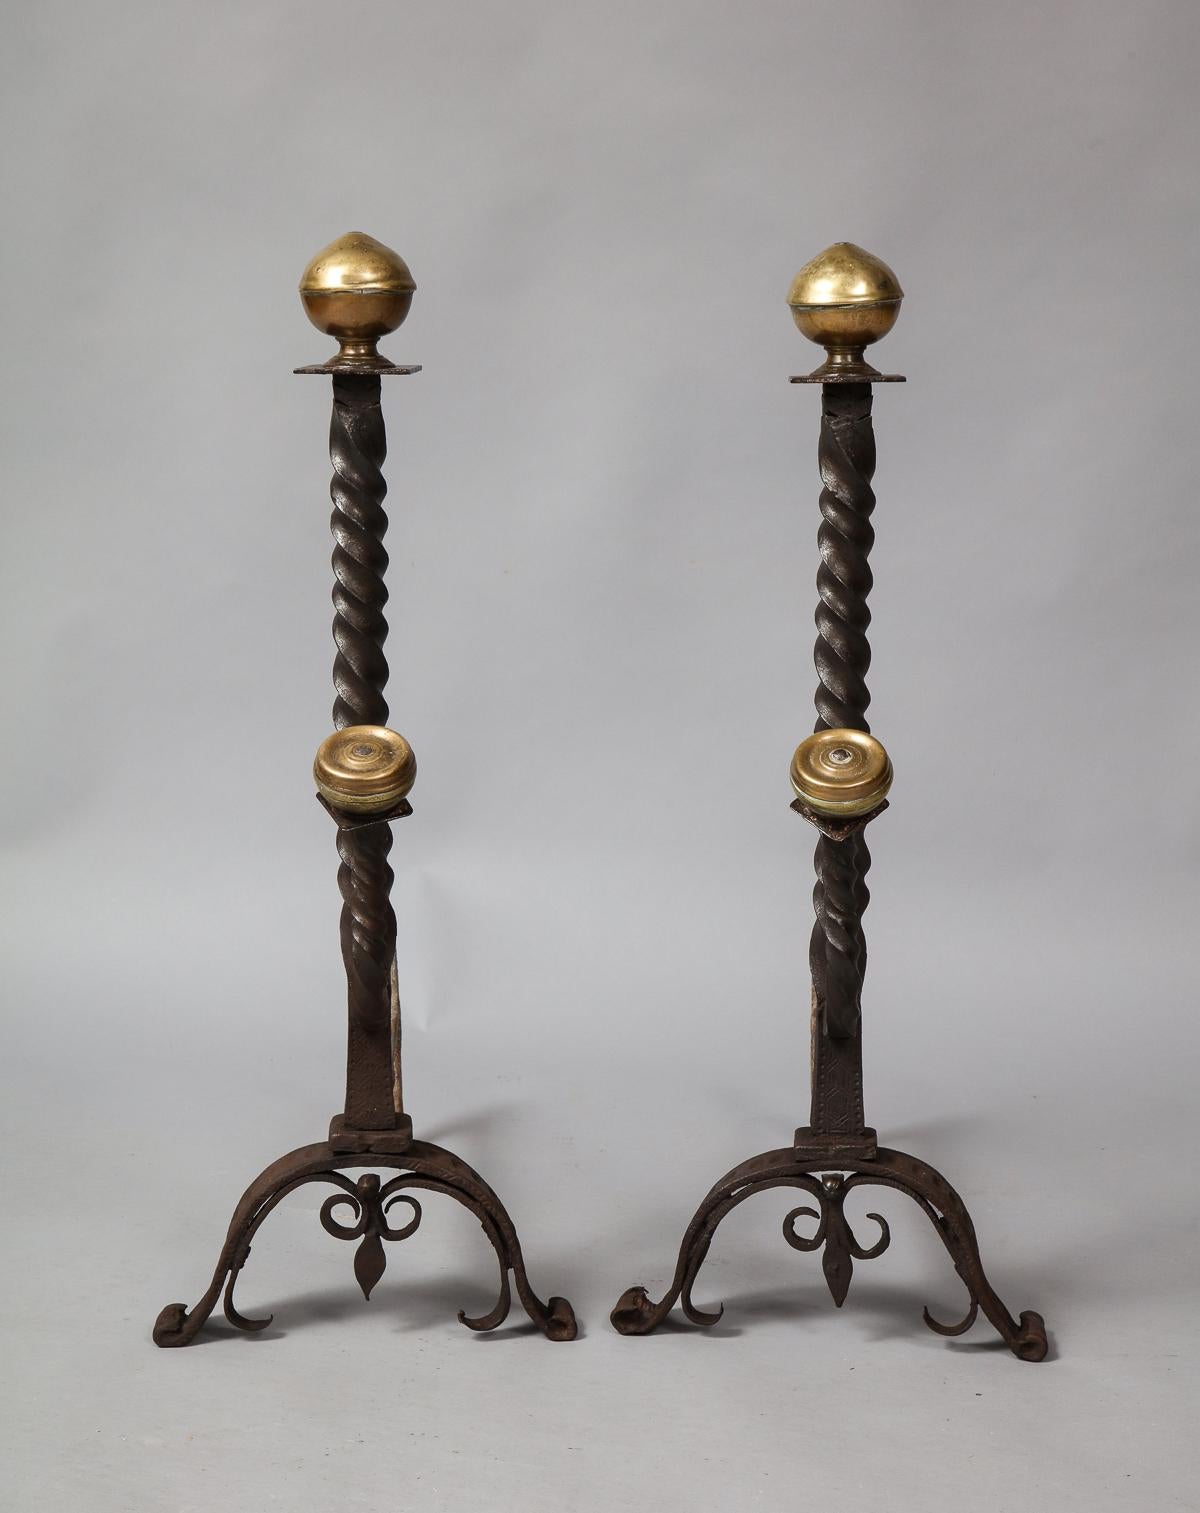 Fine pair of 17th century bronze and wrought iron andirons, having ringed suppressed ball finials on square collars above spiral twist shafts with forward facing spit supports with similar finials and spiral twists, standing on arched legs with